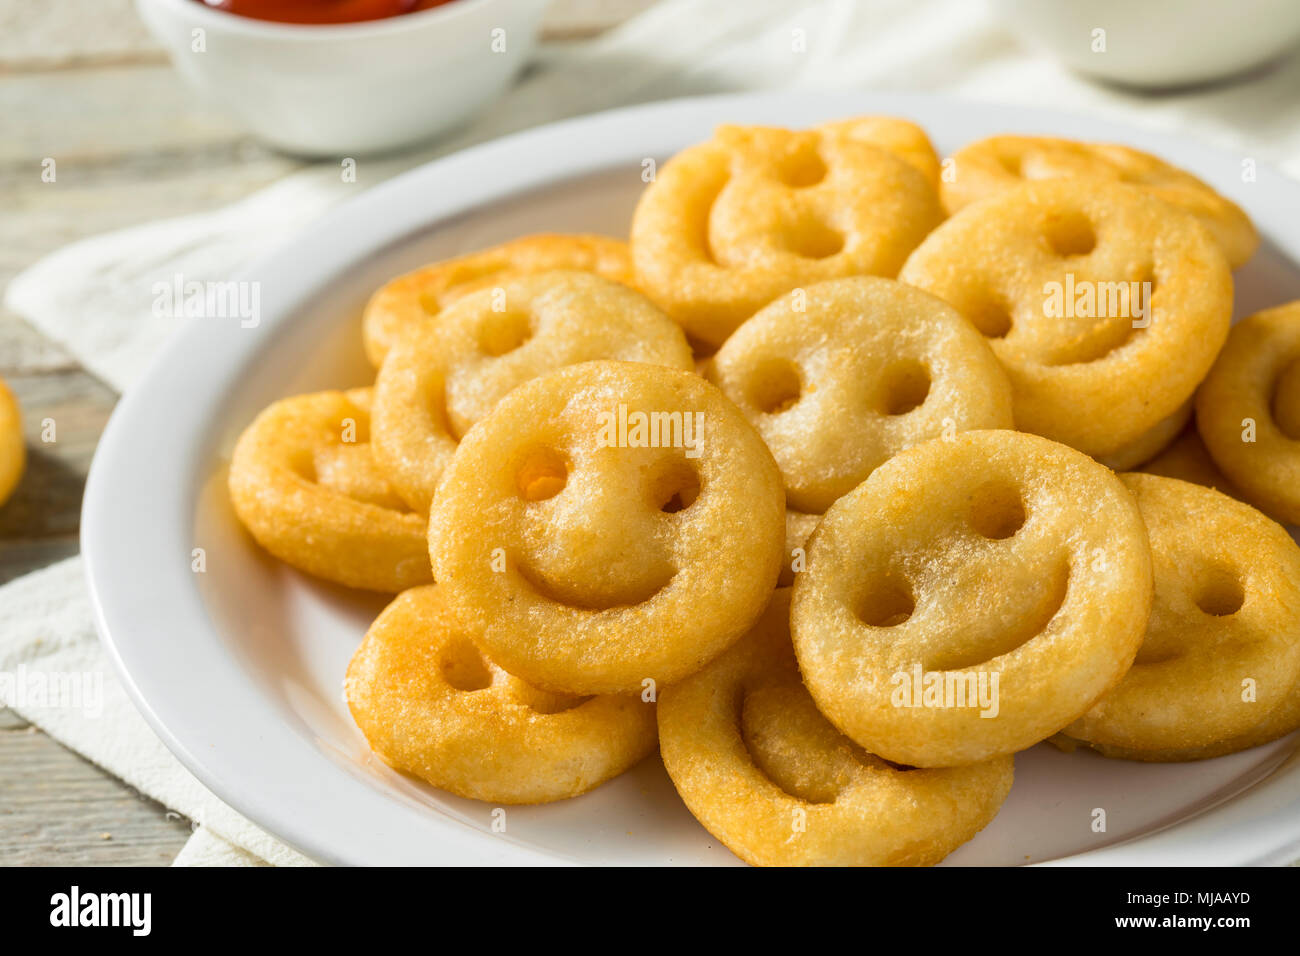 Homemade Smiley Face French Fries with Ketchup Stock Photo